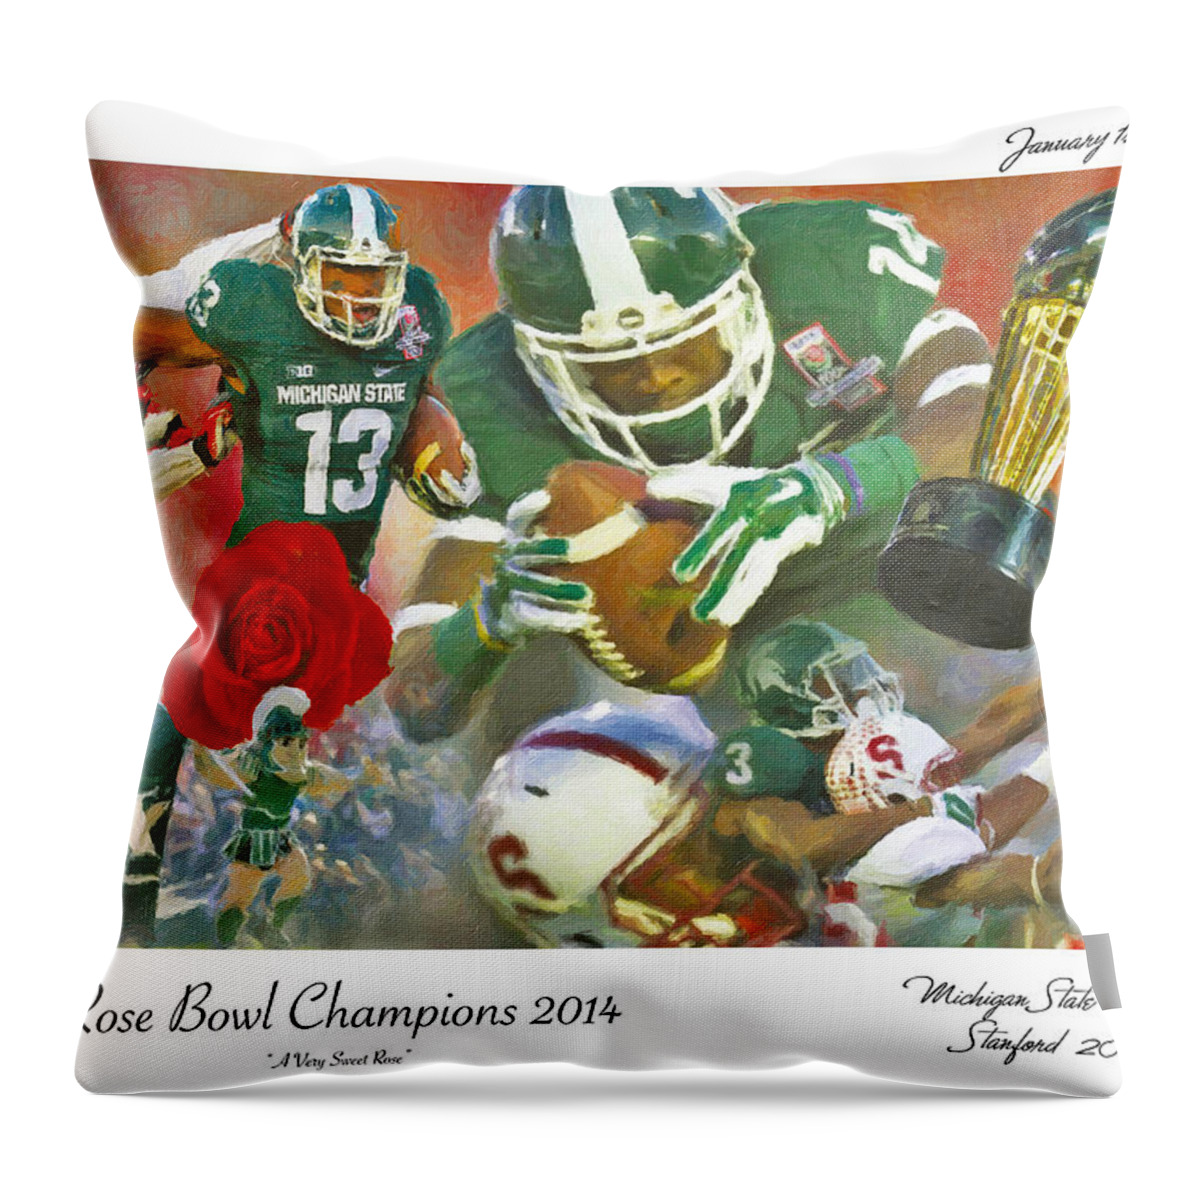 Michigan State Throw Pillow featuring the painting A Very Sweet Rose by John Farr